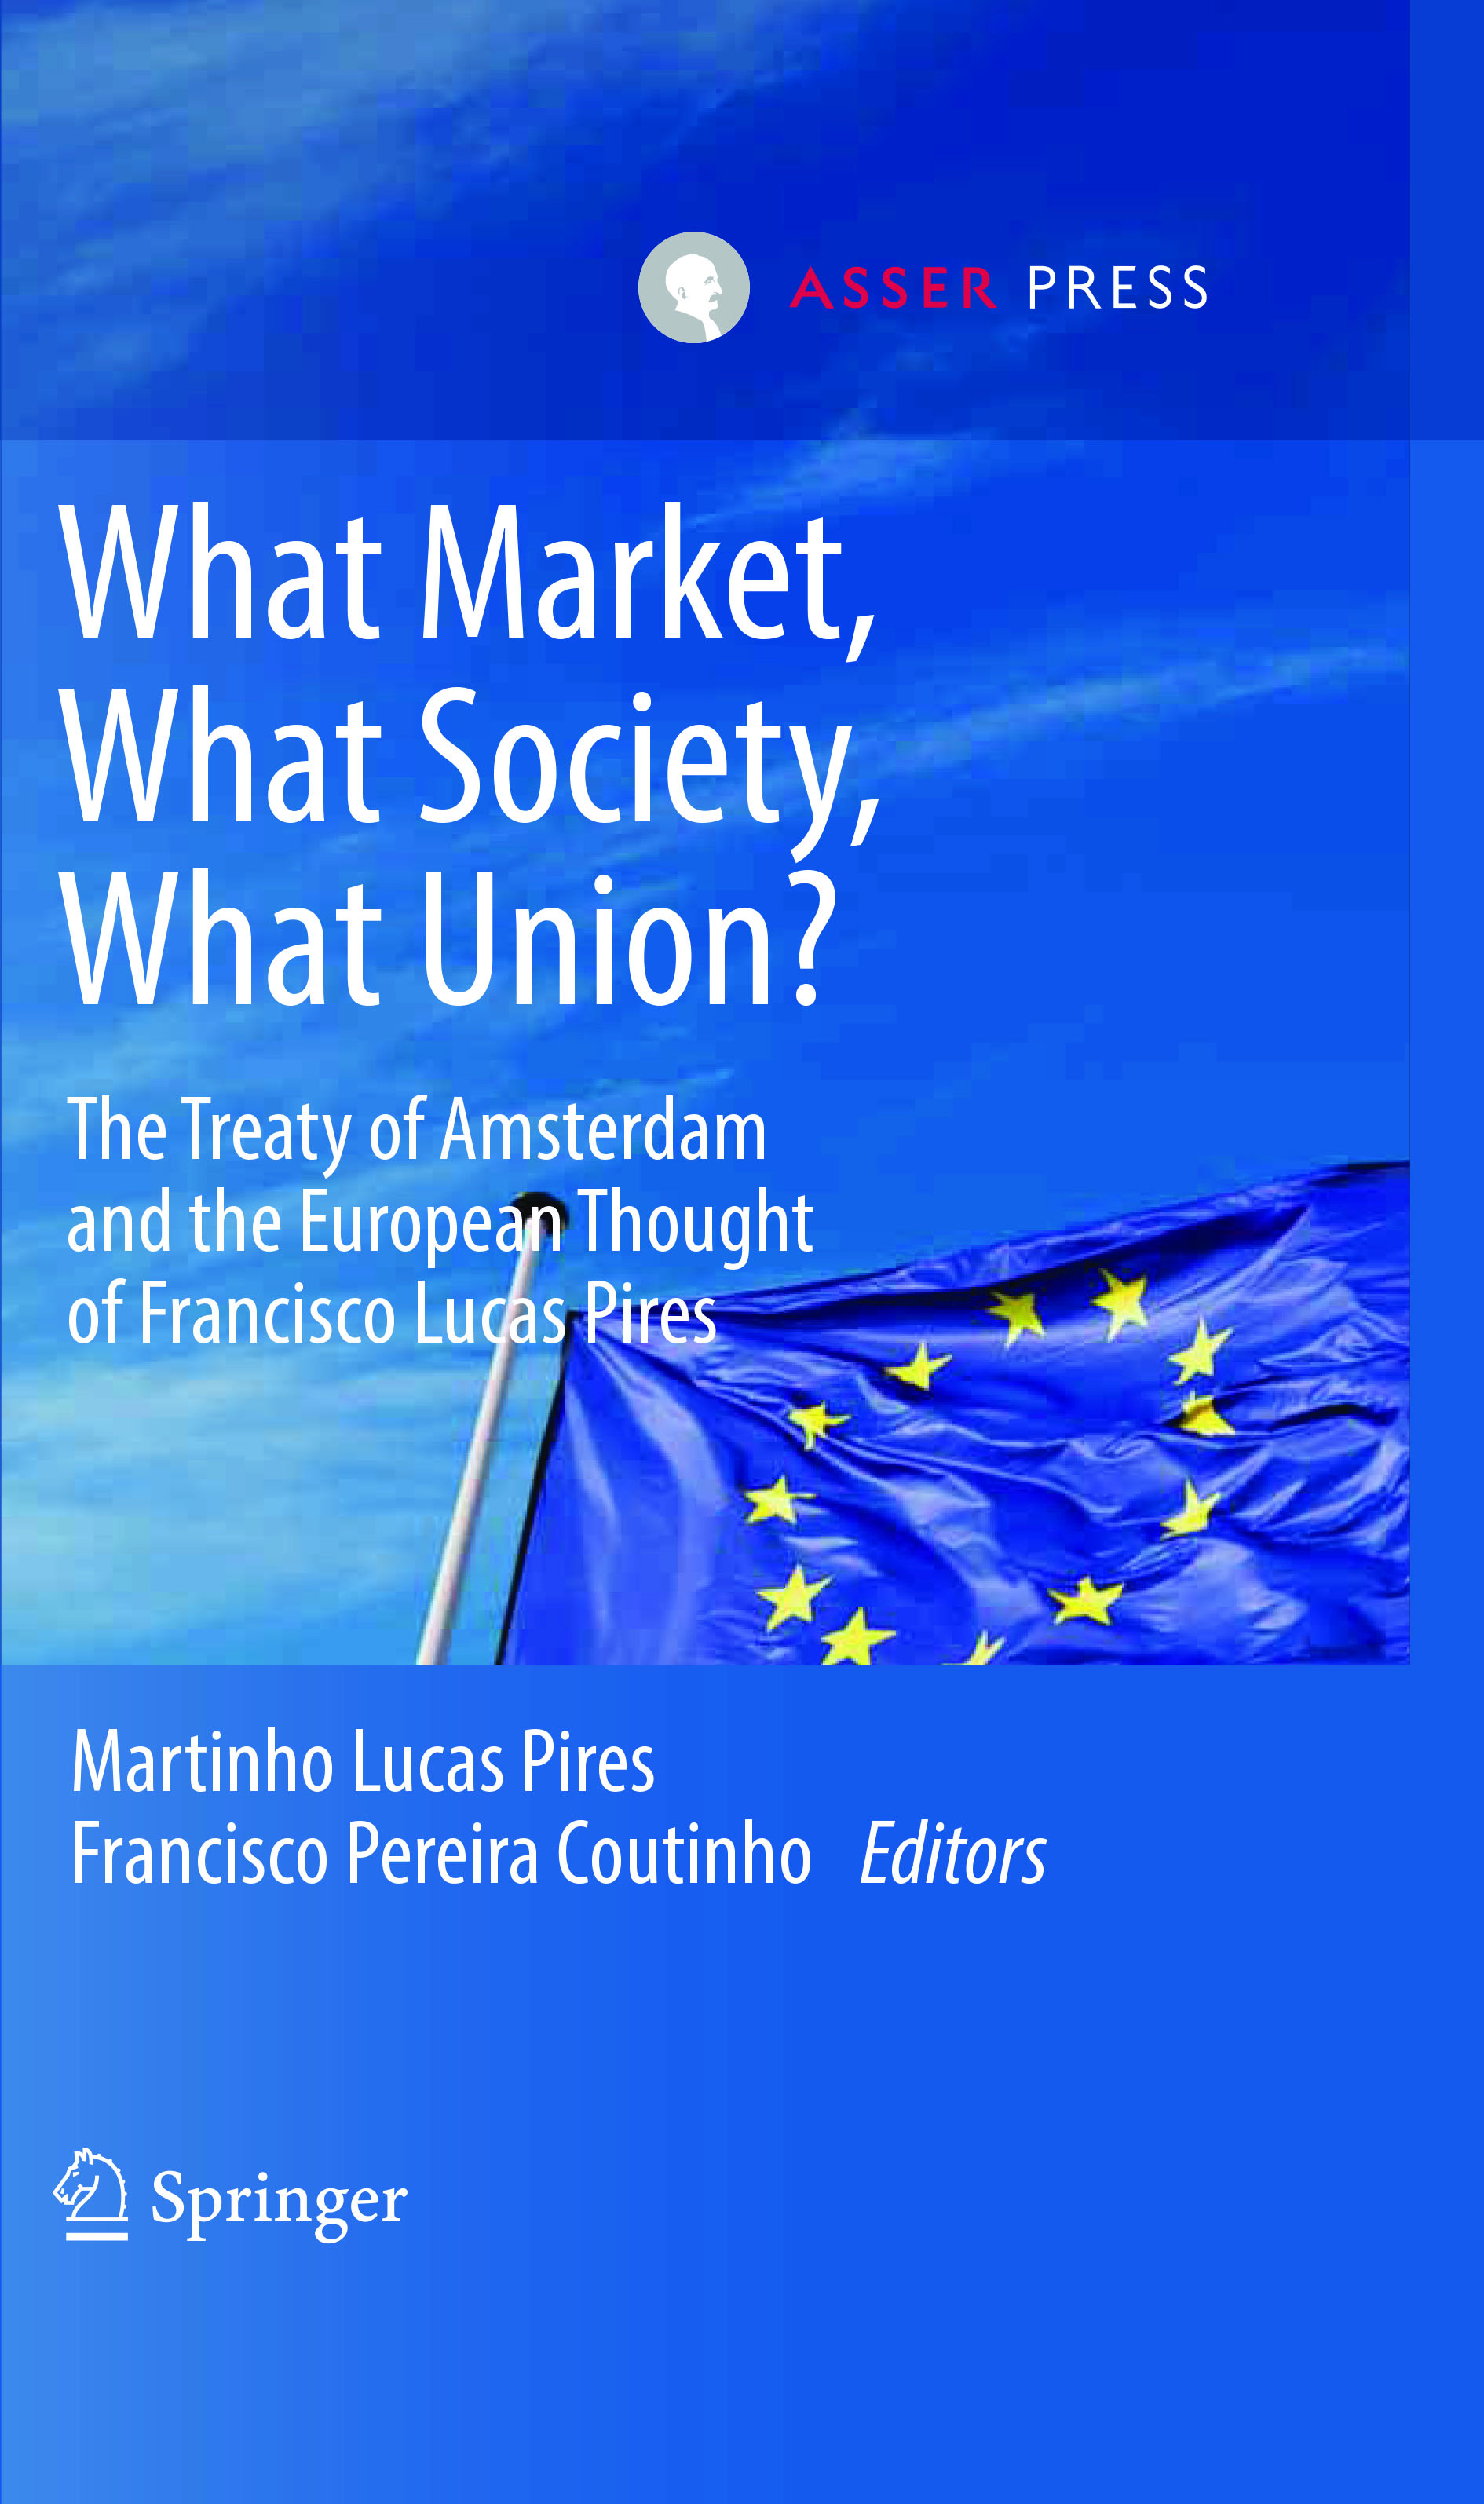 What Market, What Society, What Union? - The Treaty of Amsterdam and the European Thought of Francisco Lucas Pires